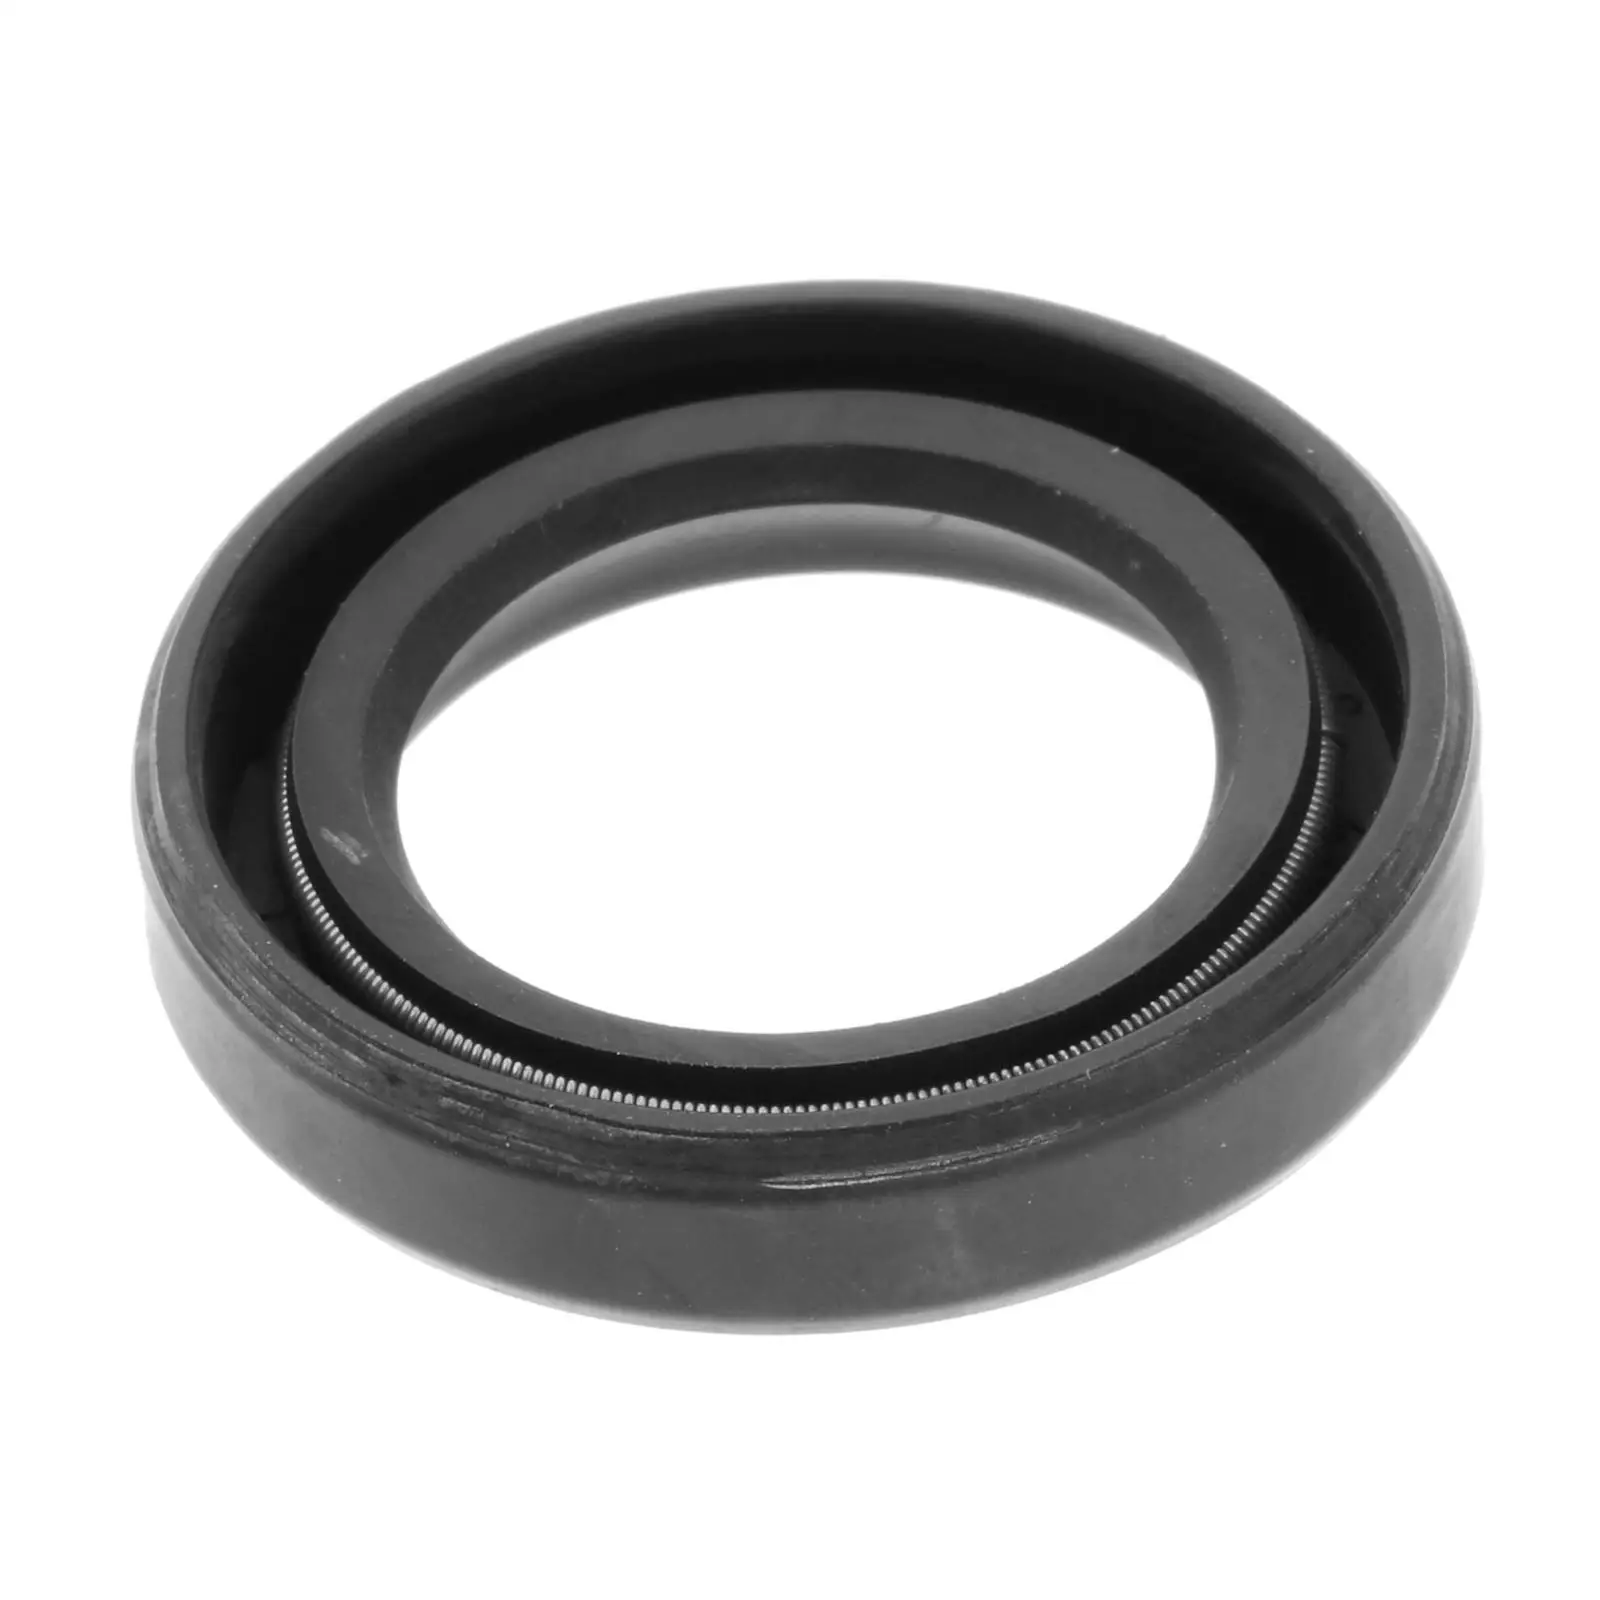 Oil Seal S-type Motocycle Accessory Replacements Parts for Yamaha Outboard 8HP, 9HP, 9.9HP, 15HP, 20HP, 25HP